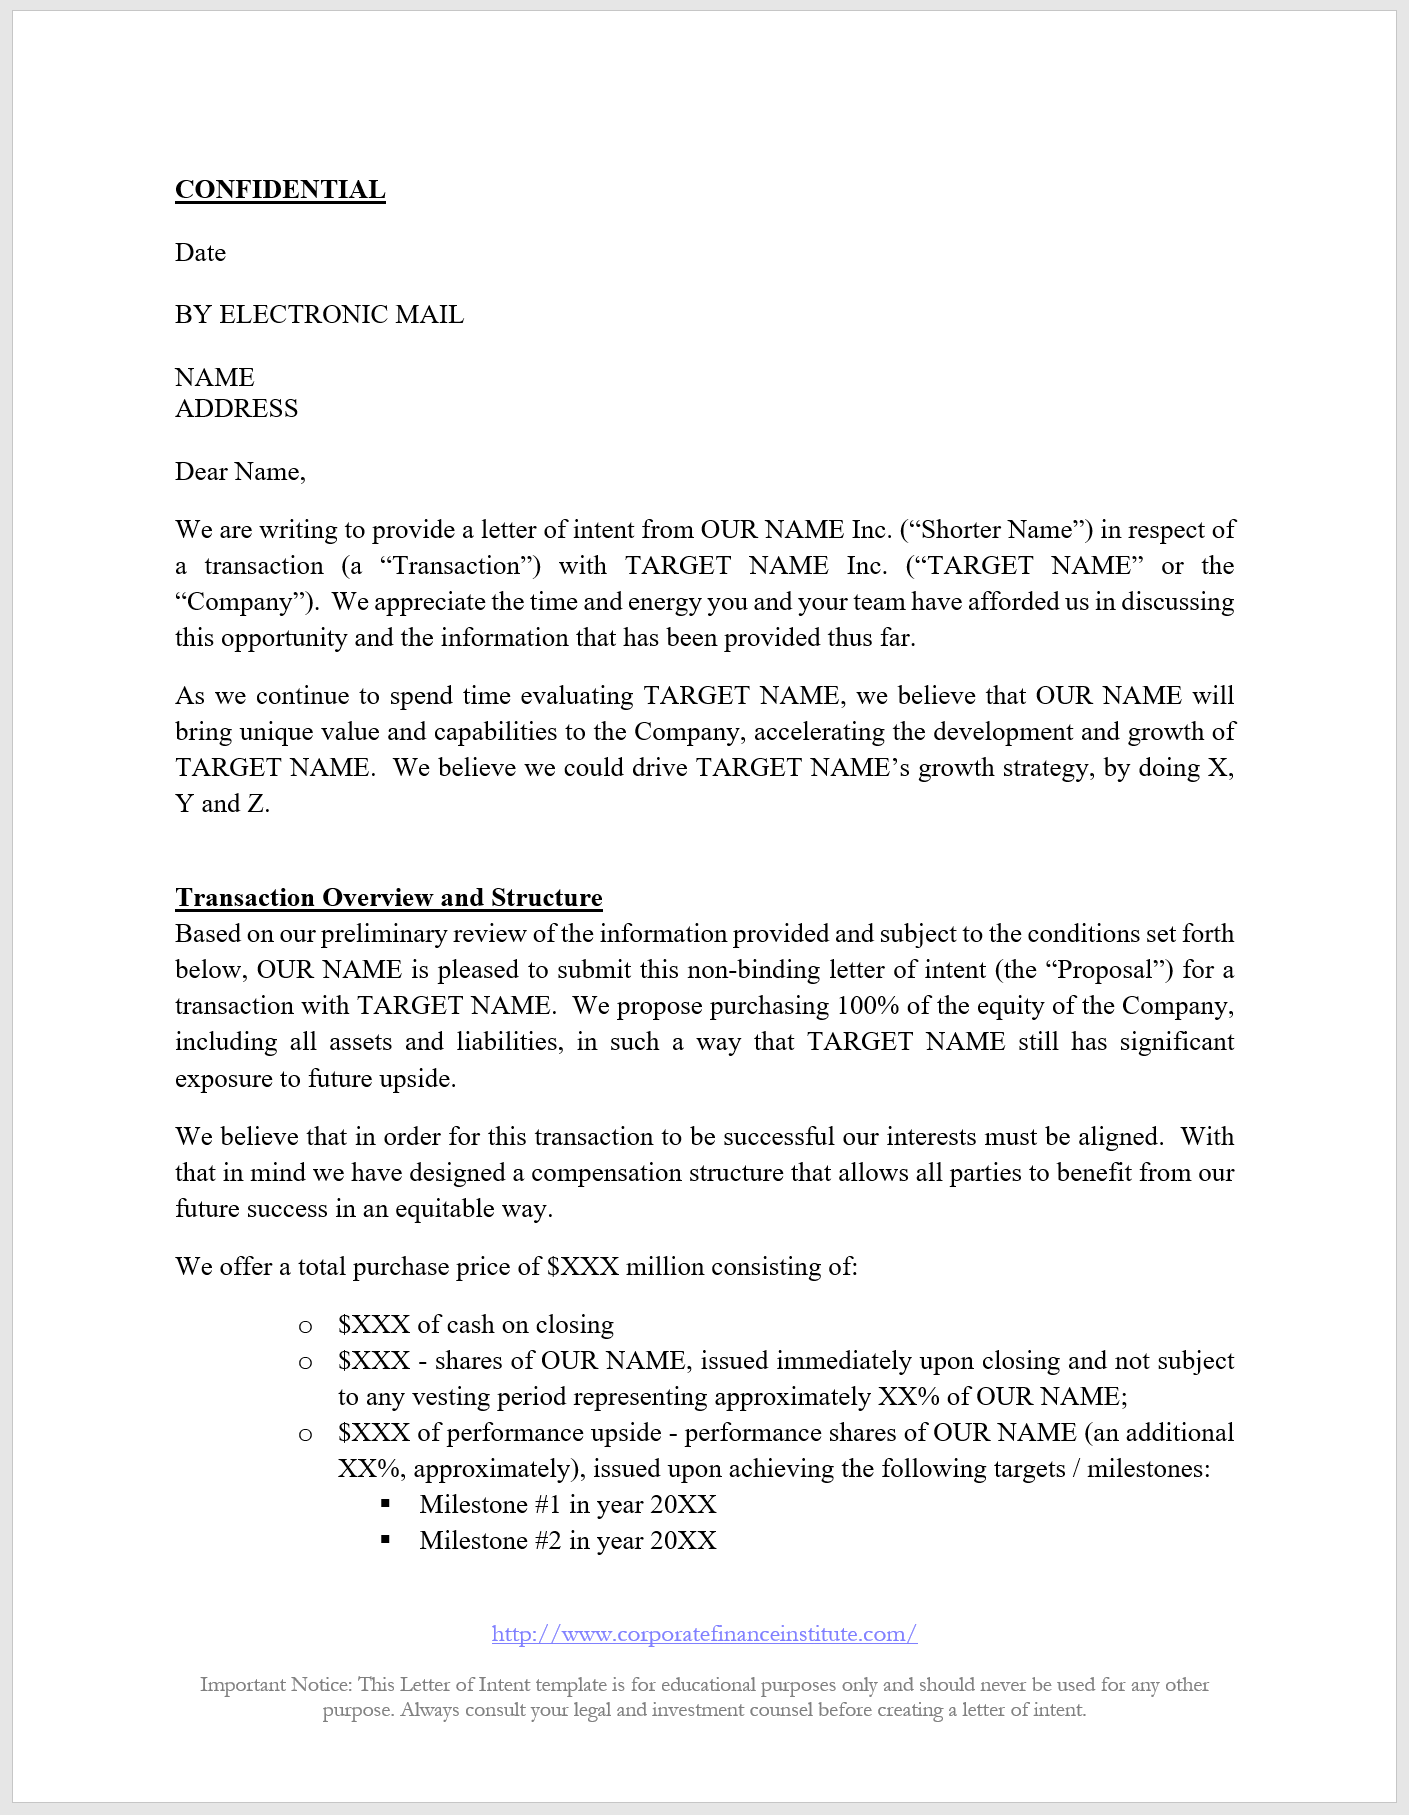 Sample Letter Of Intent For Job Application from corporatefinanceinstitute.com